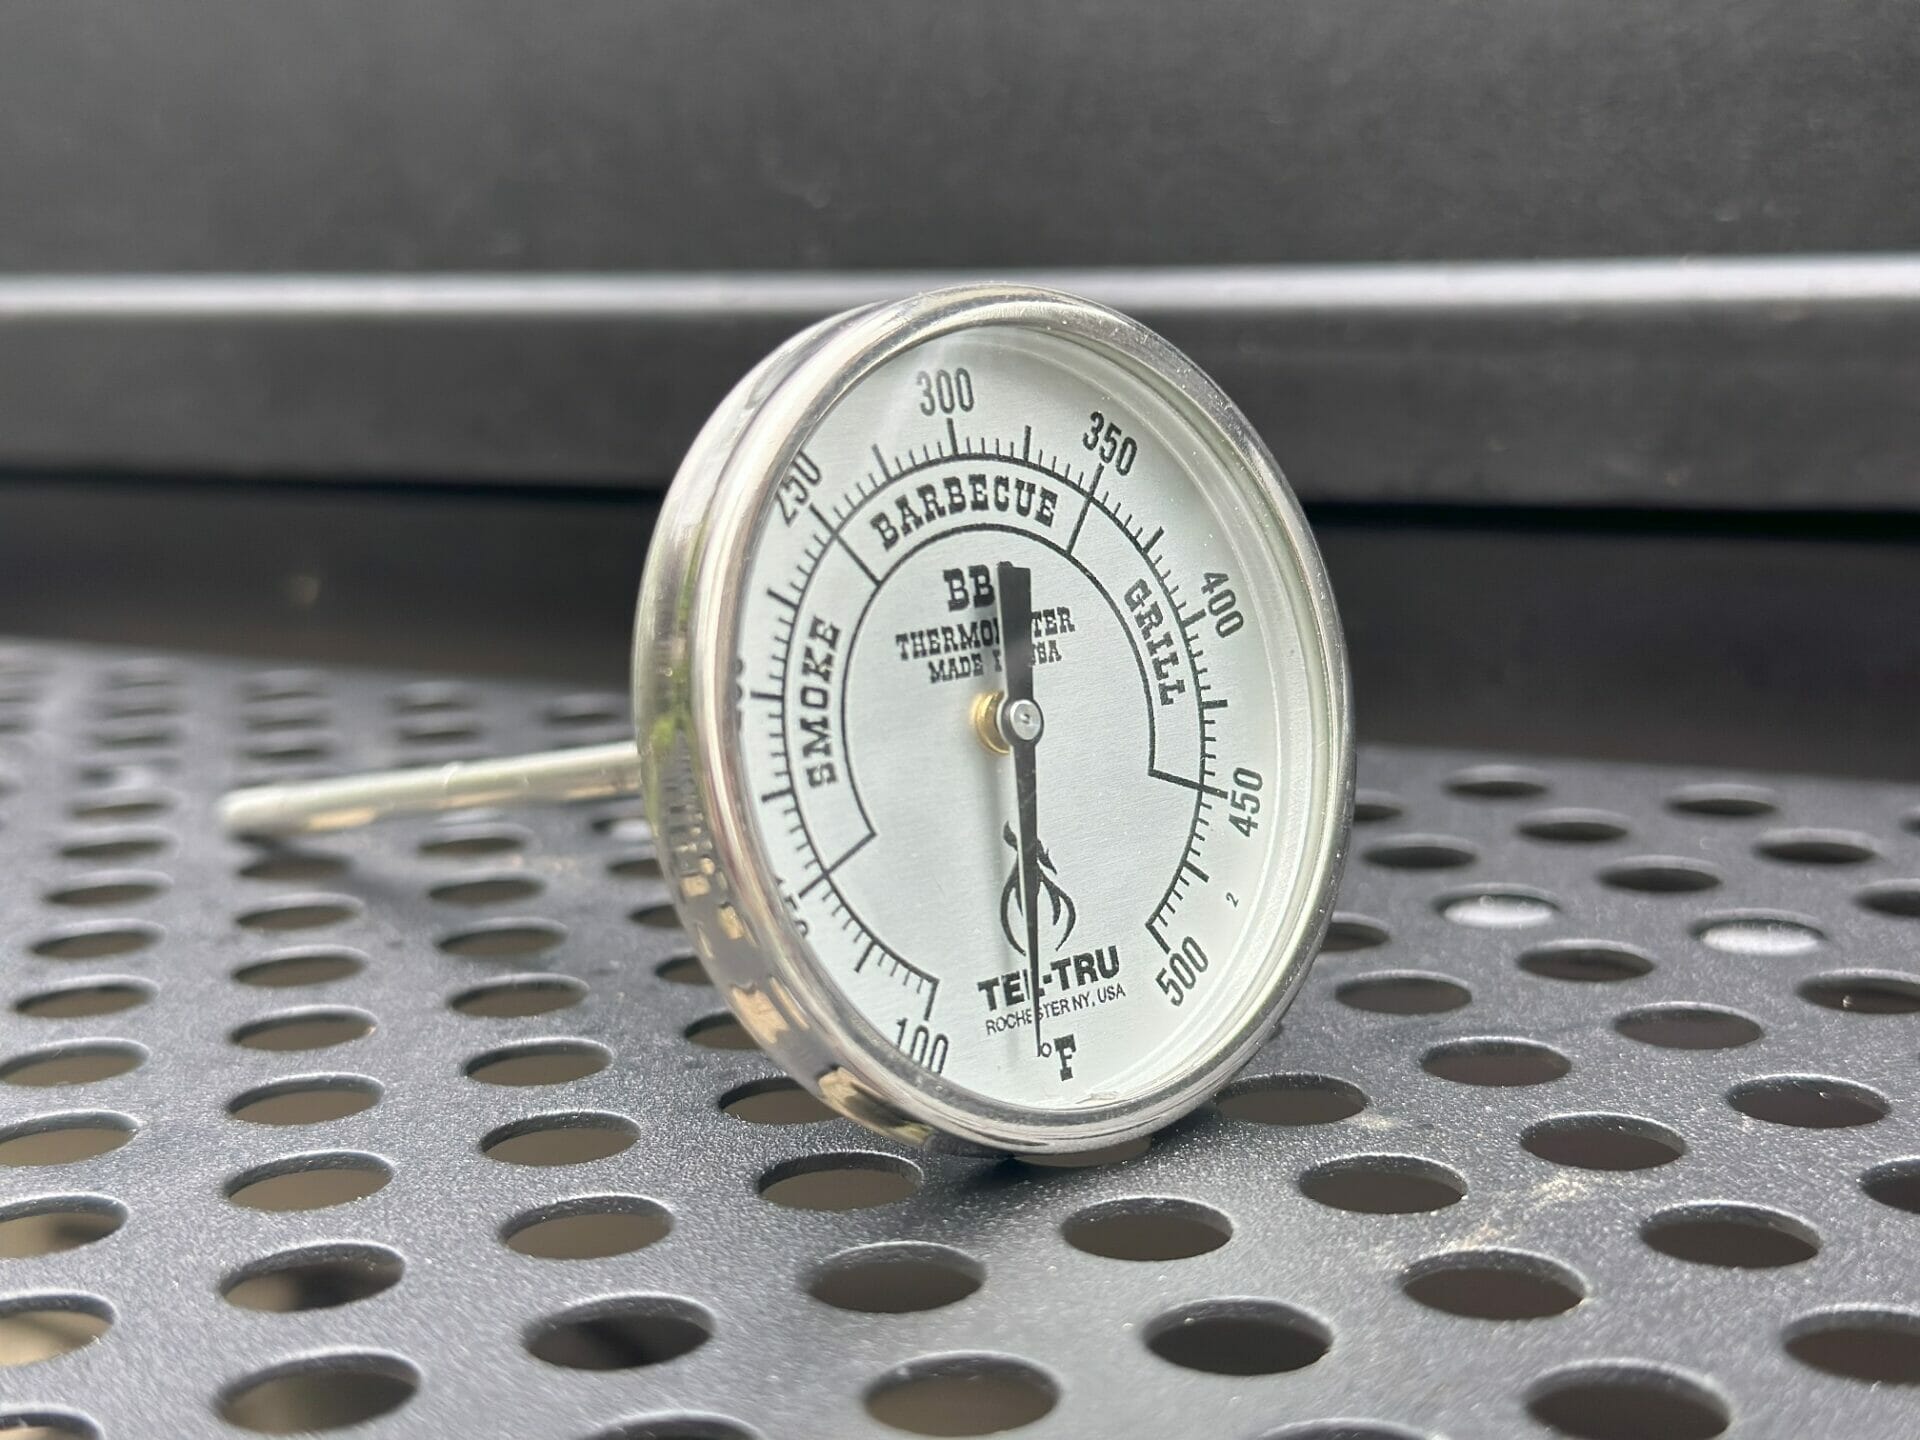 The PK BBQ Thermometer by Tel-tru